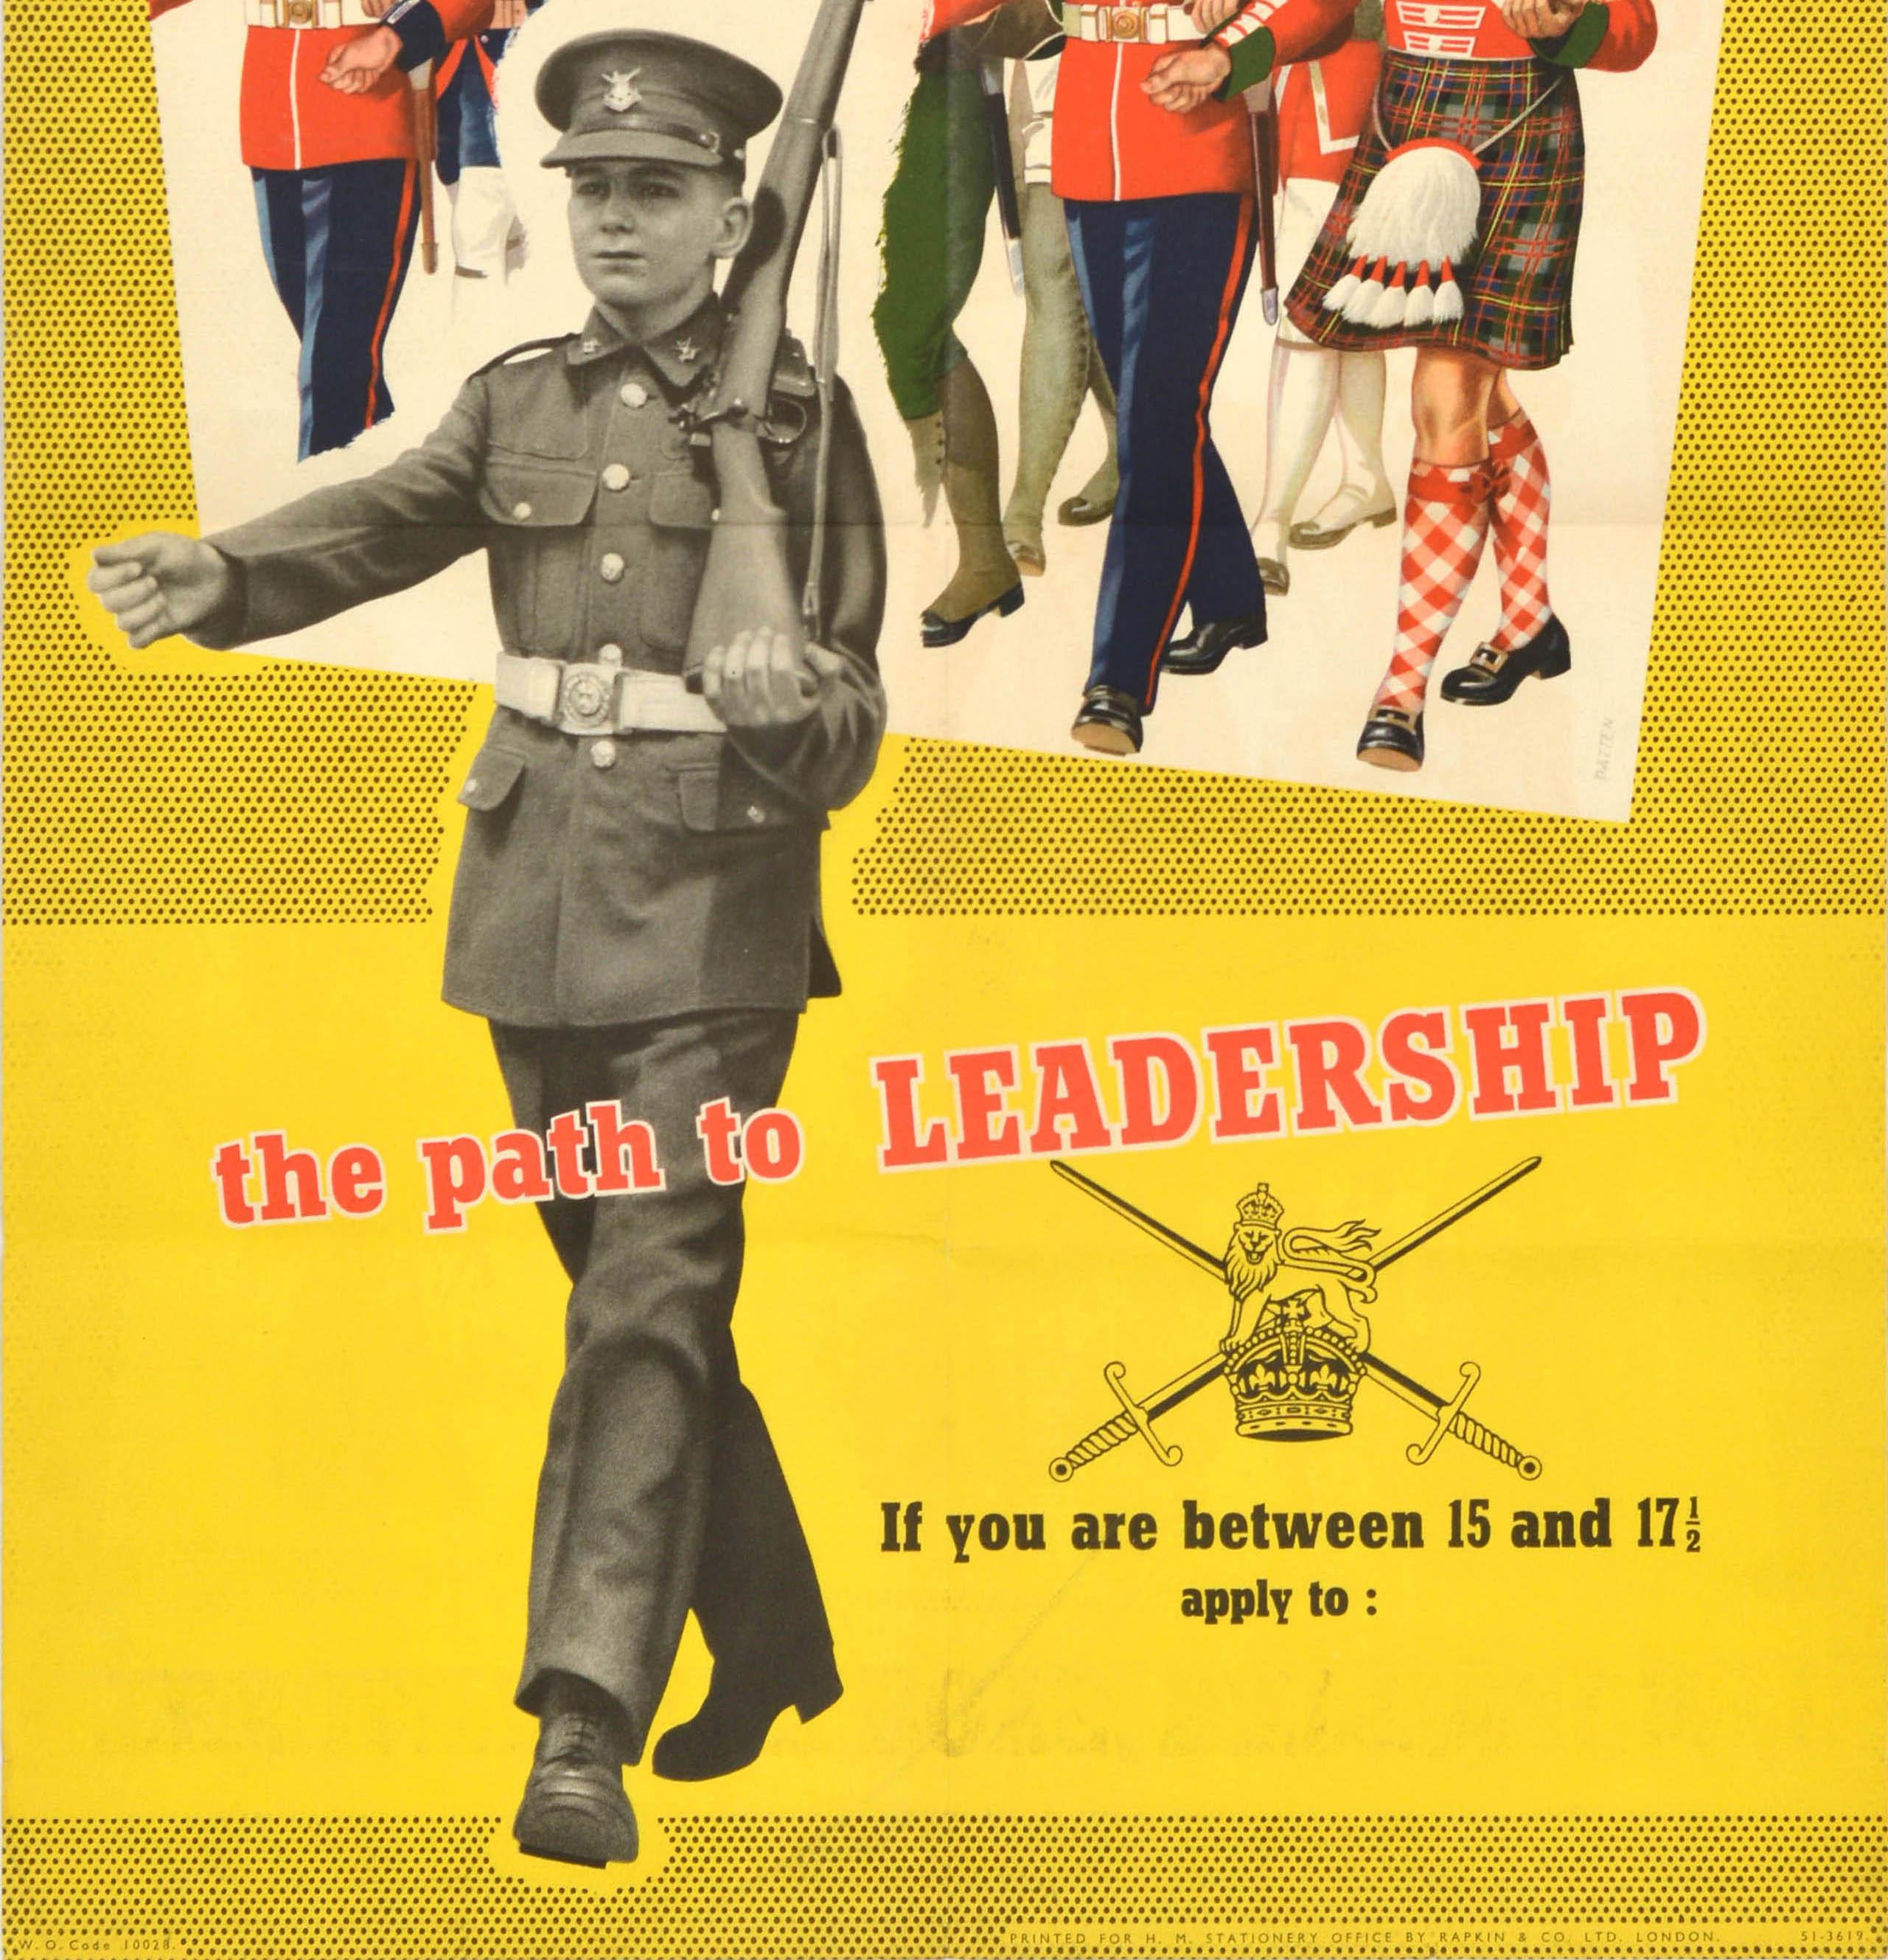 Original vintage recruitment poster - The Infantry Boys' Battalion The Path to Leadership - featuring an image of a young cadet in a uniform carrying a weapon over his shoulder with an illustration of uniformed soldiers in the background. Printed